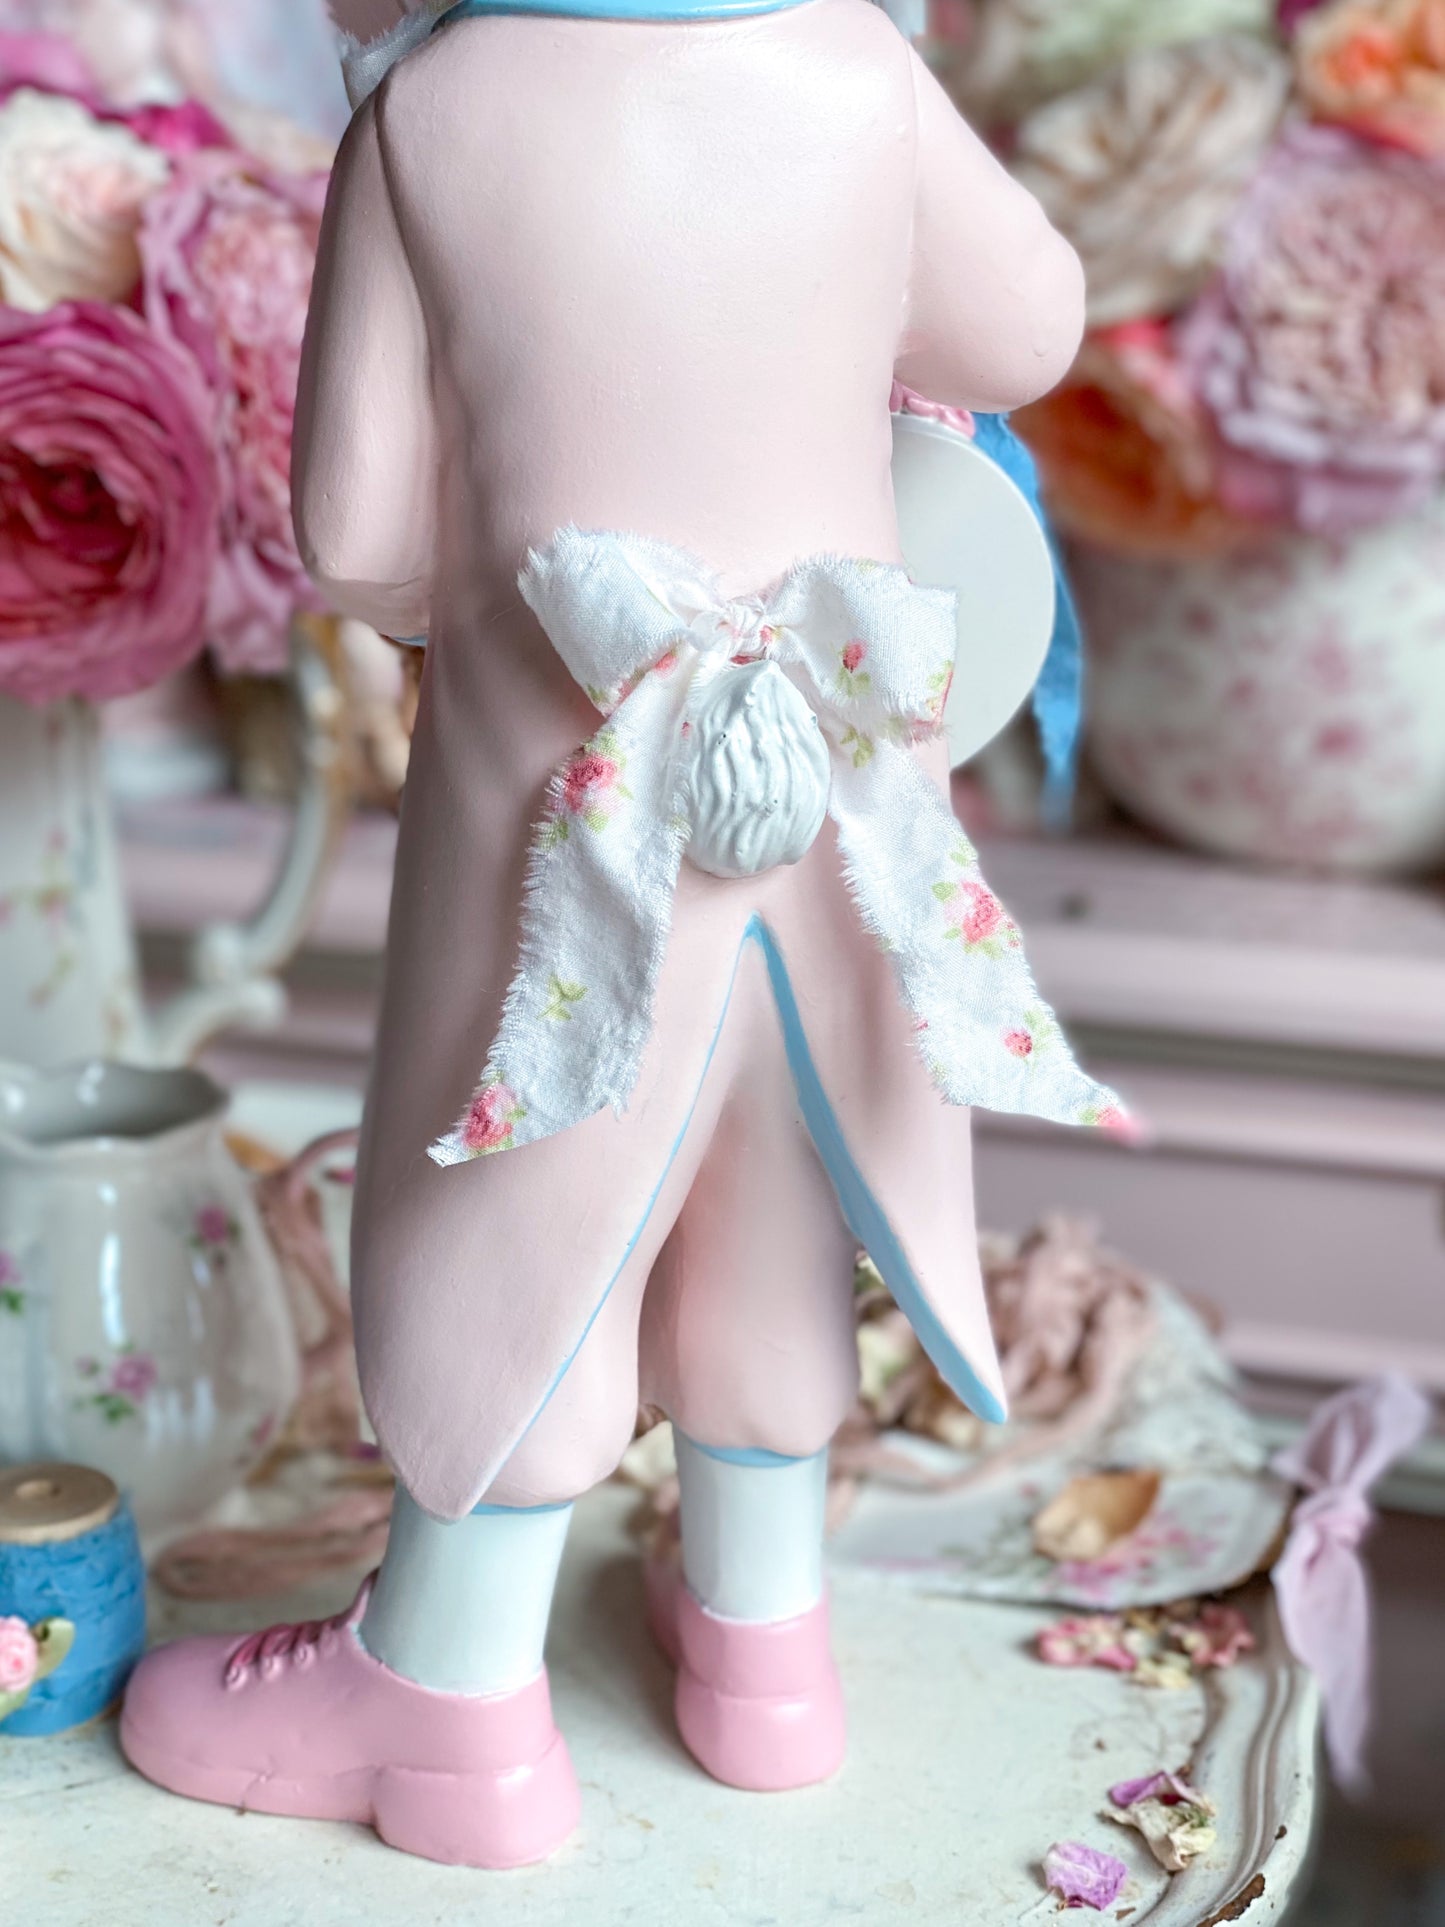 Bespoke Hand Painted Pastel Pink and Blue White Rabbit Figurine Holding Pocket Watch